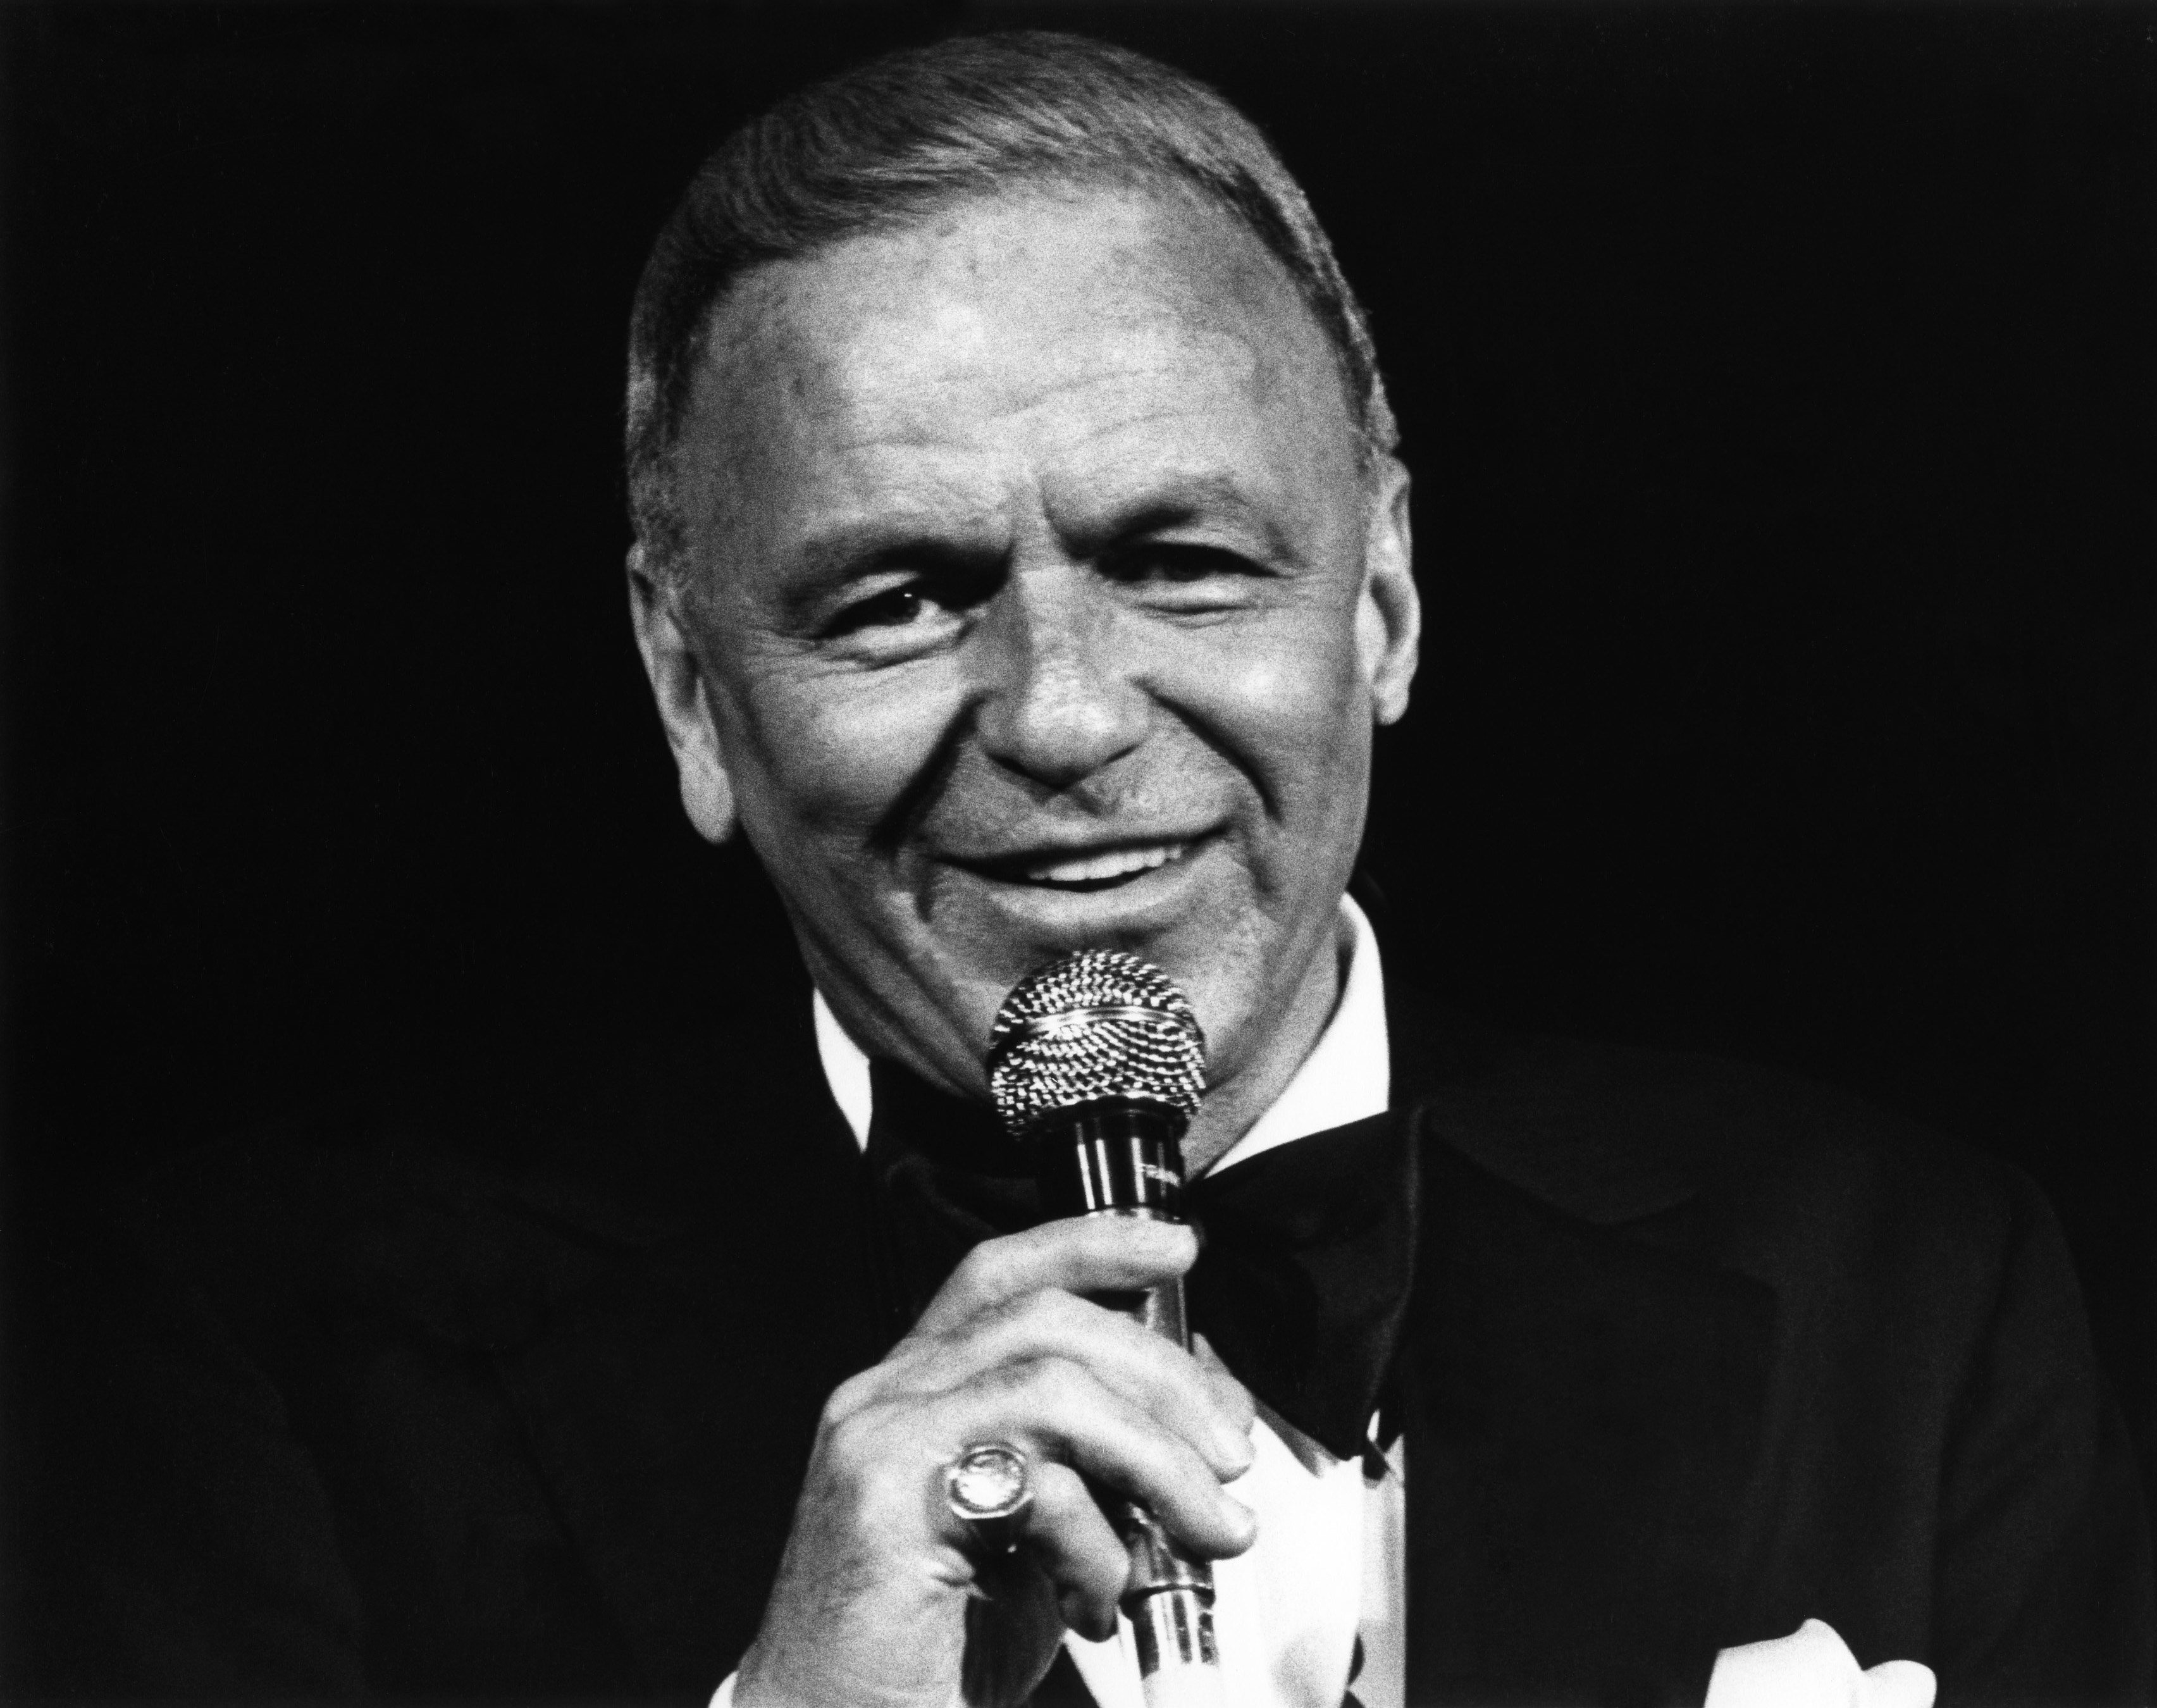 : Singer Frank Sinatra performs at The Universal Amphitheatre on July 6, 1980 in Universal City, Los Angeles, California | Photos: Getty Images